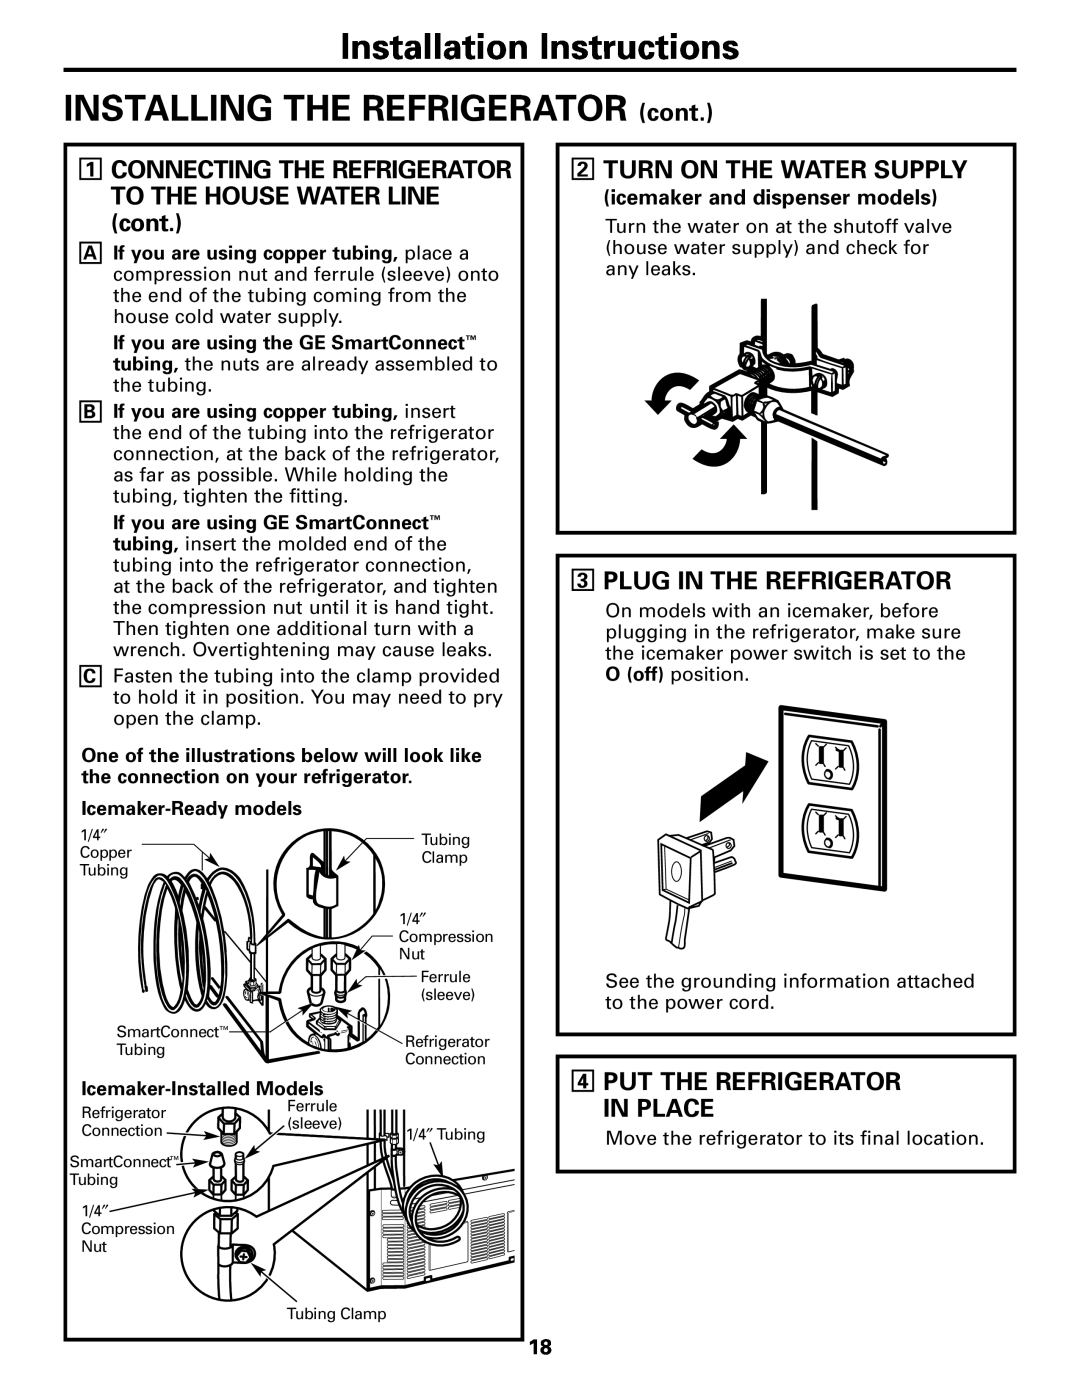 GE Monogram 22 Installation Instructions INSTALLING THE REFRIGERATOR cont, Turn On The Water Supply, Icemaker-Ready models 